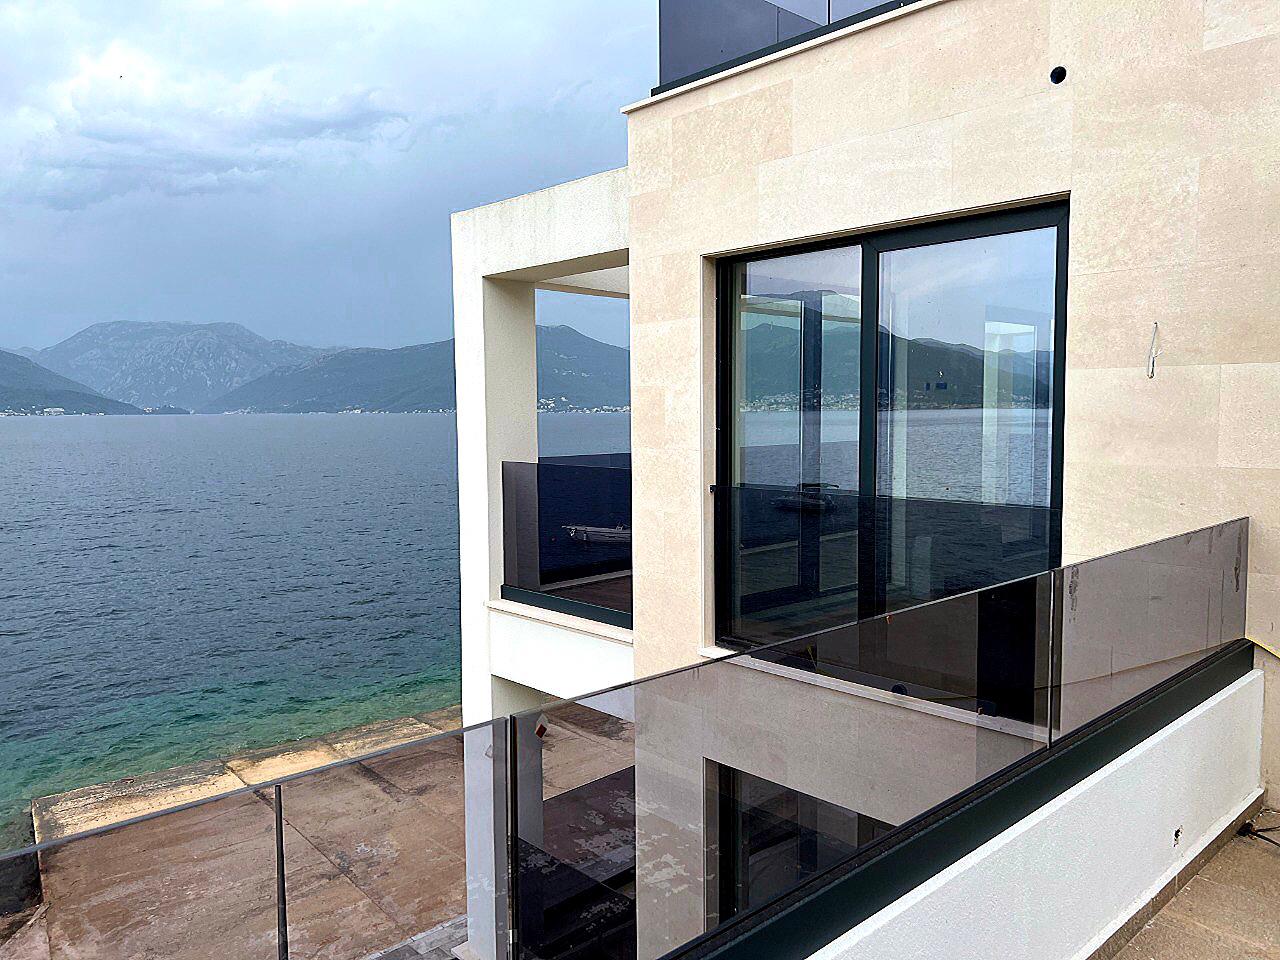 Luxury villa with a private beach in Tivat